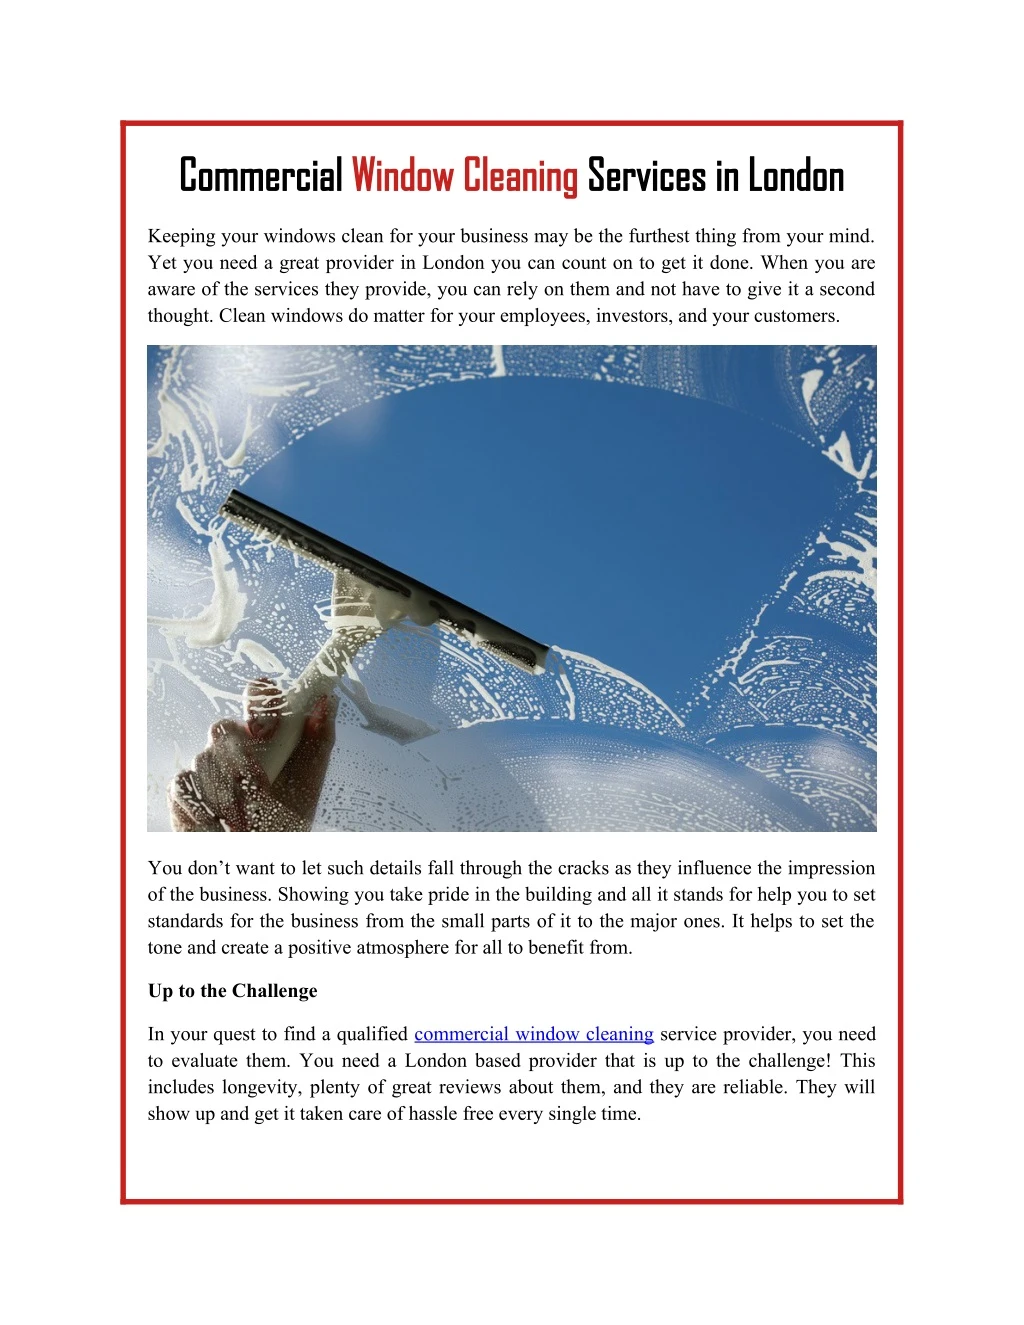 commercial commercial window cleaning window